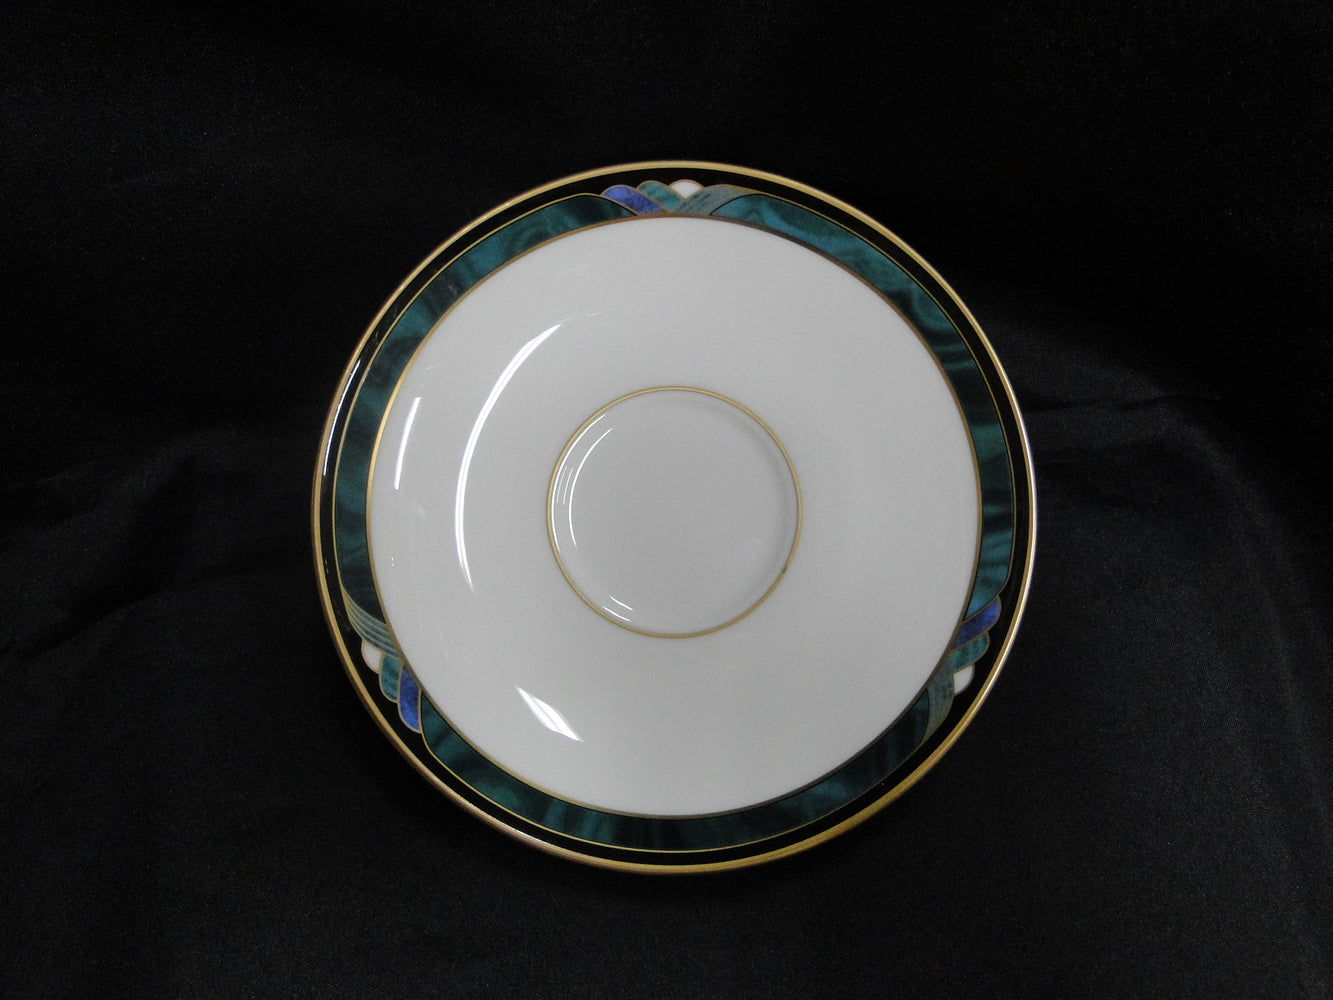 Lenox Kelly, Green, Black, Purple Band: 6" Saucer Only, No Cup